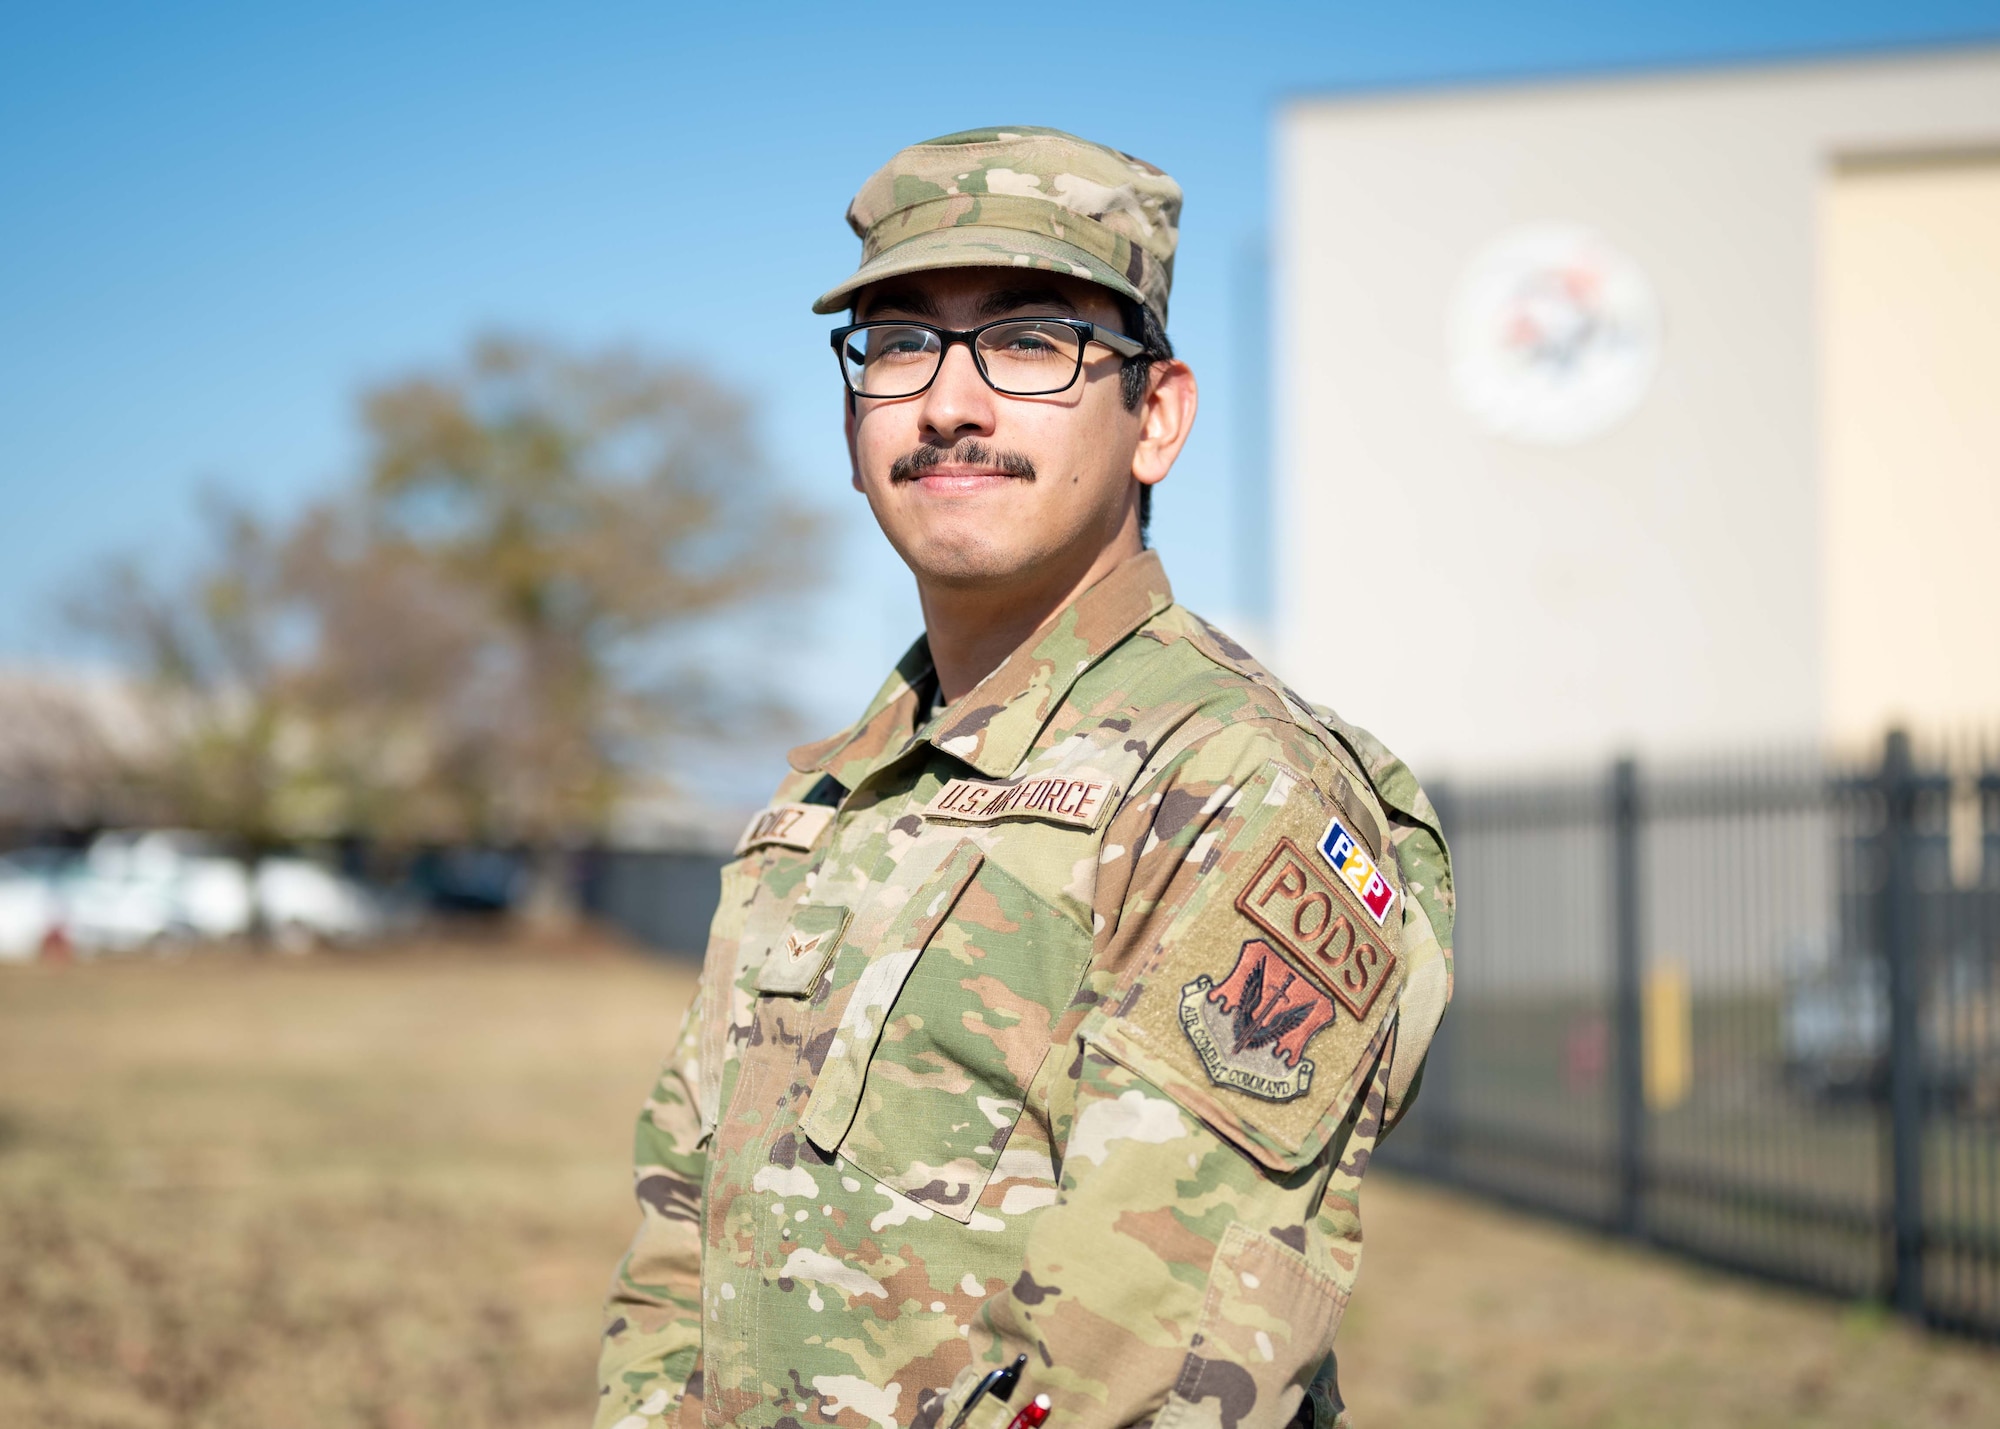 U.S. Air Force Airman 1st Class Michael Vasquez, 20th Component Maintenance Squadron electronic warfare systems specialist, poses for a photo.